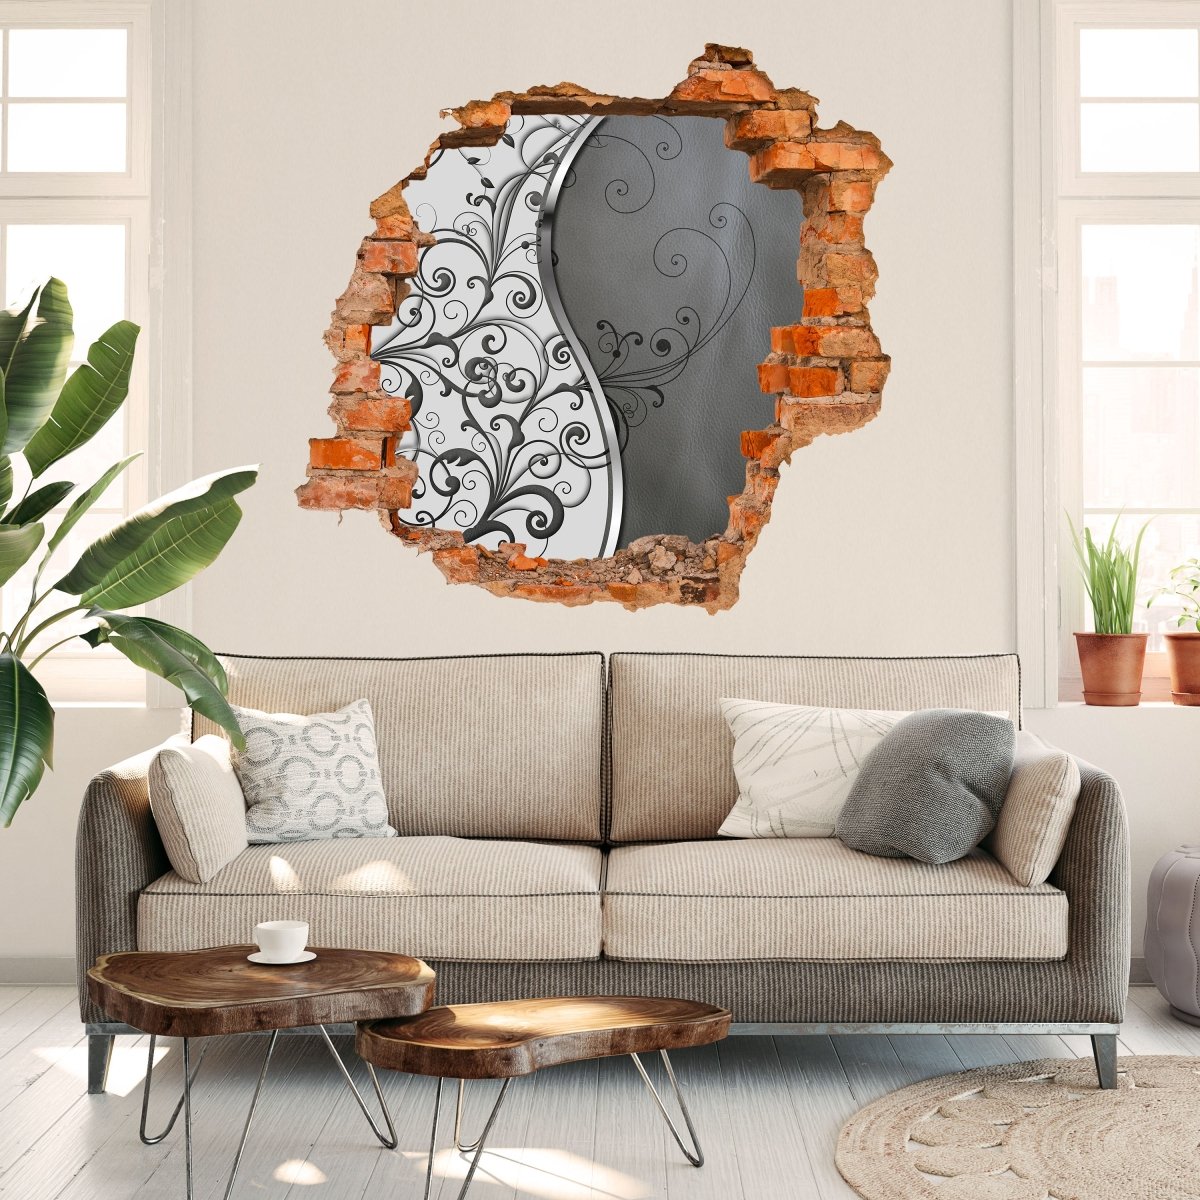 3D Leather Diamond Abstract Wall Sticker - Wall Decal M0525